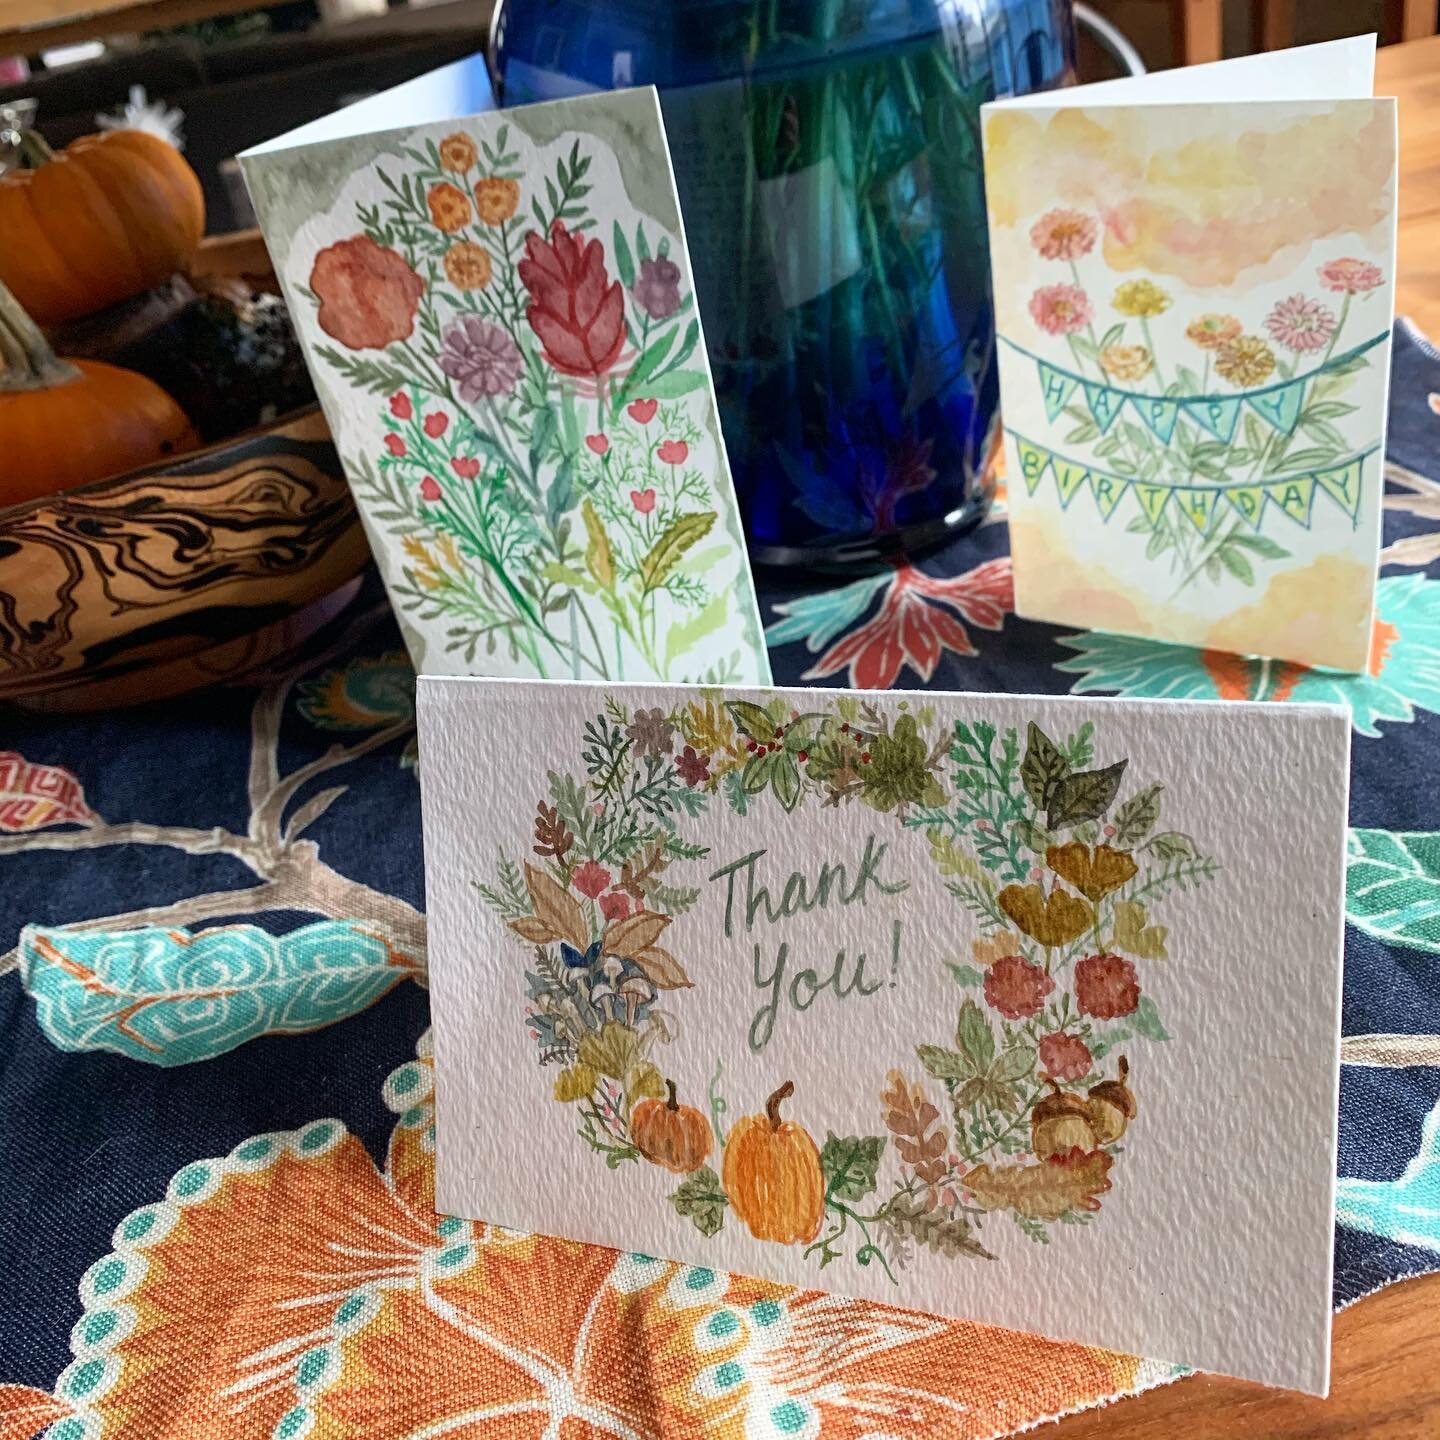 Some watercolor cards I&rsquo;m sending out to friends soon 💜

#usps #letters #cards #handwritten #watercolor #watercolorpaint #paint #handmade #allibratt #flowers #fall #autumn #happybirthday #thankyou #wreath #art #artist #artofinstagram #artistso